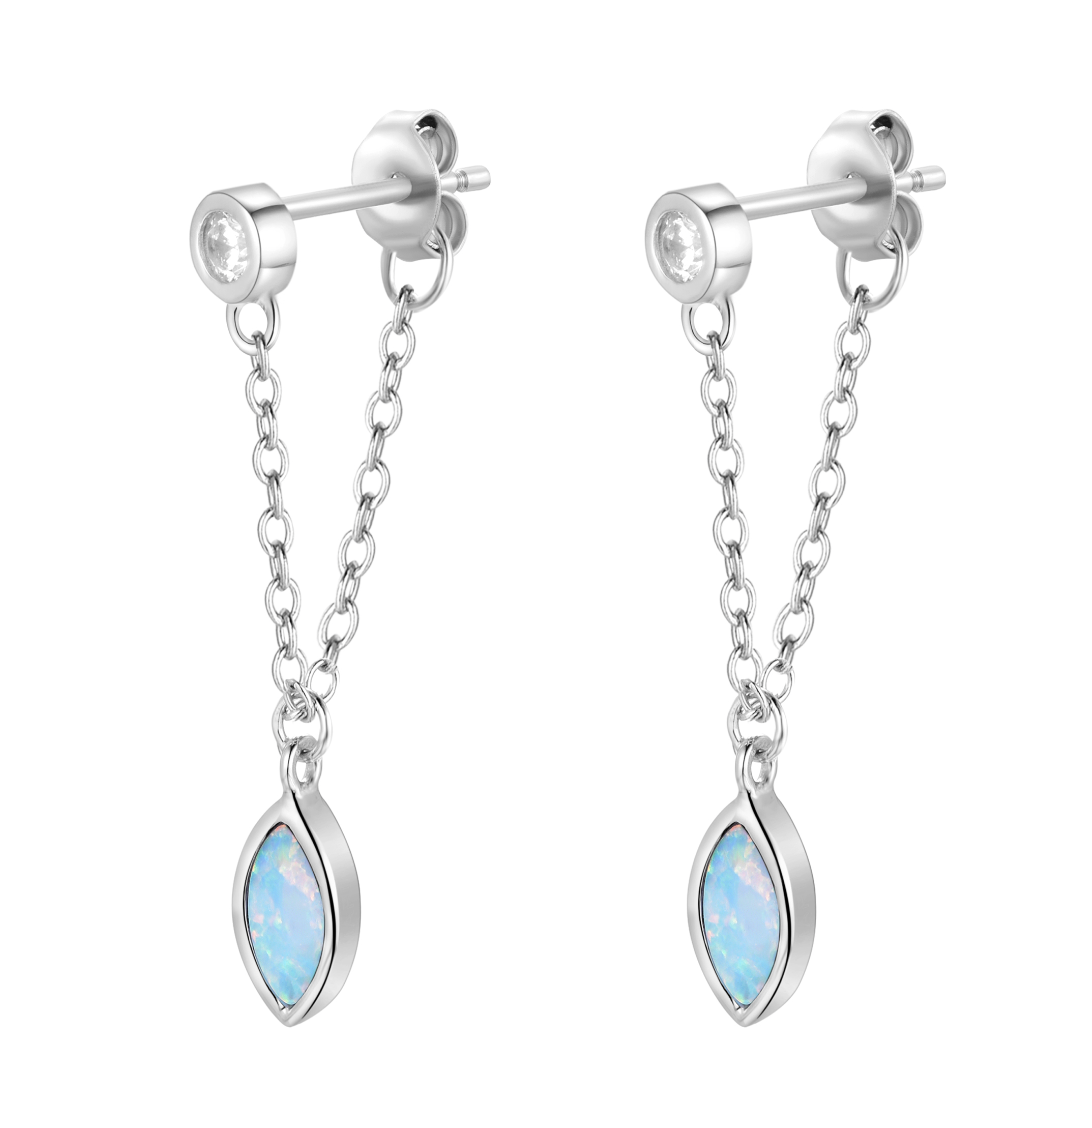 Sterling Silver White Created Opal Earrings. Wholesale 